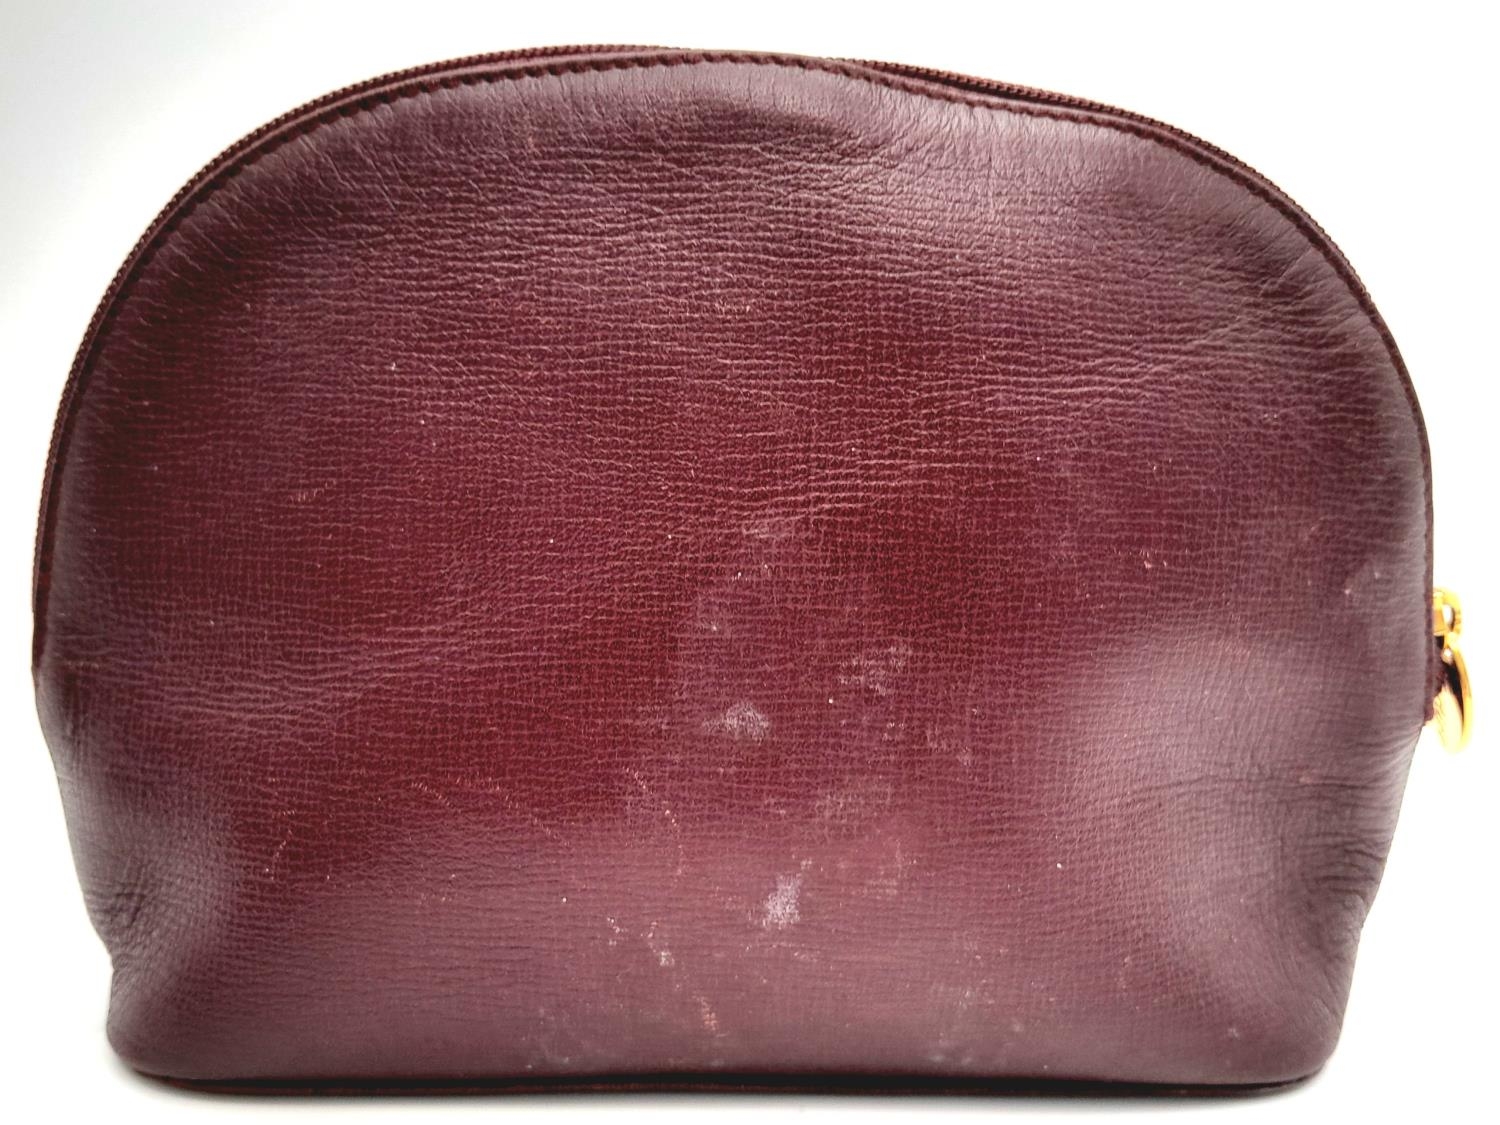 A Vintage Cartier Burgundy Pouch. Leather exterior with zip top closure. Burgundy canvas interior. - Image 3 of 11